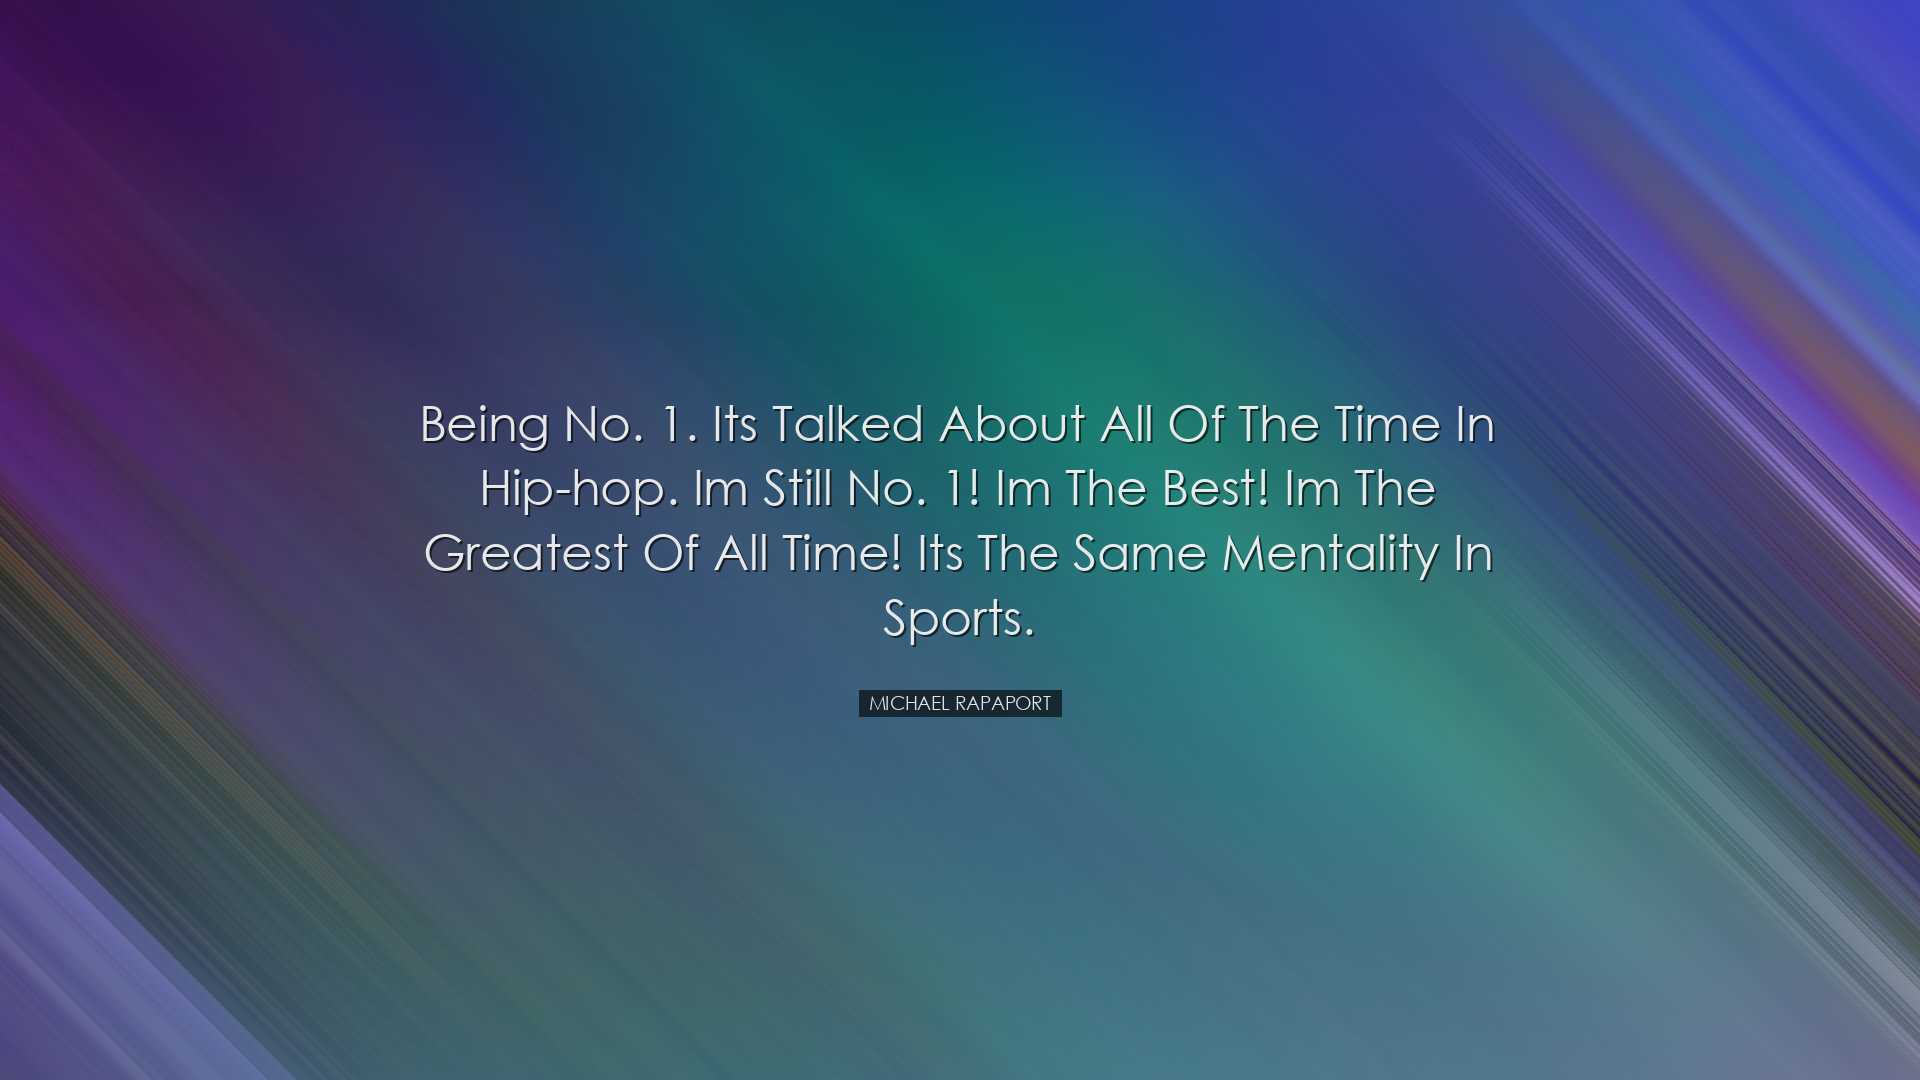 Being No. 1. Its talked about all of the time in hip-hop. Im still